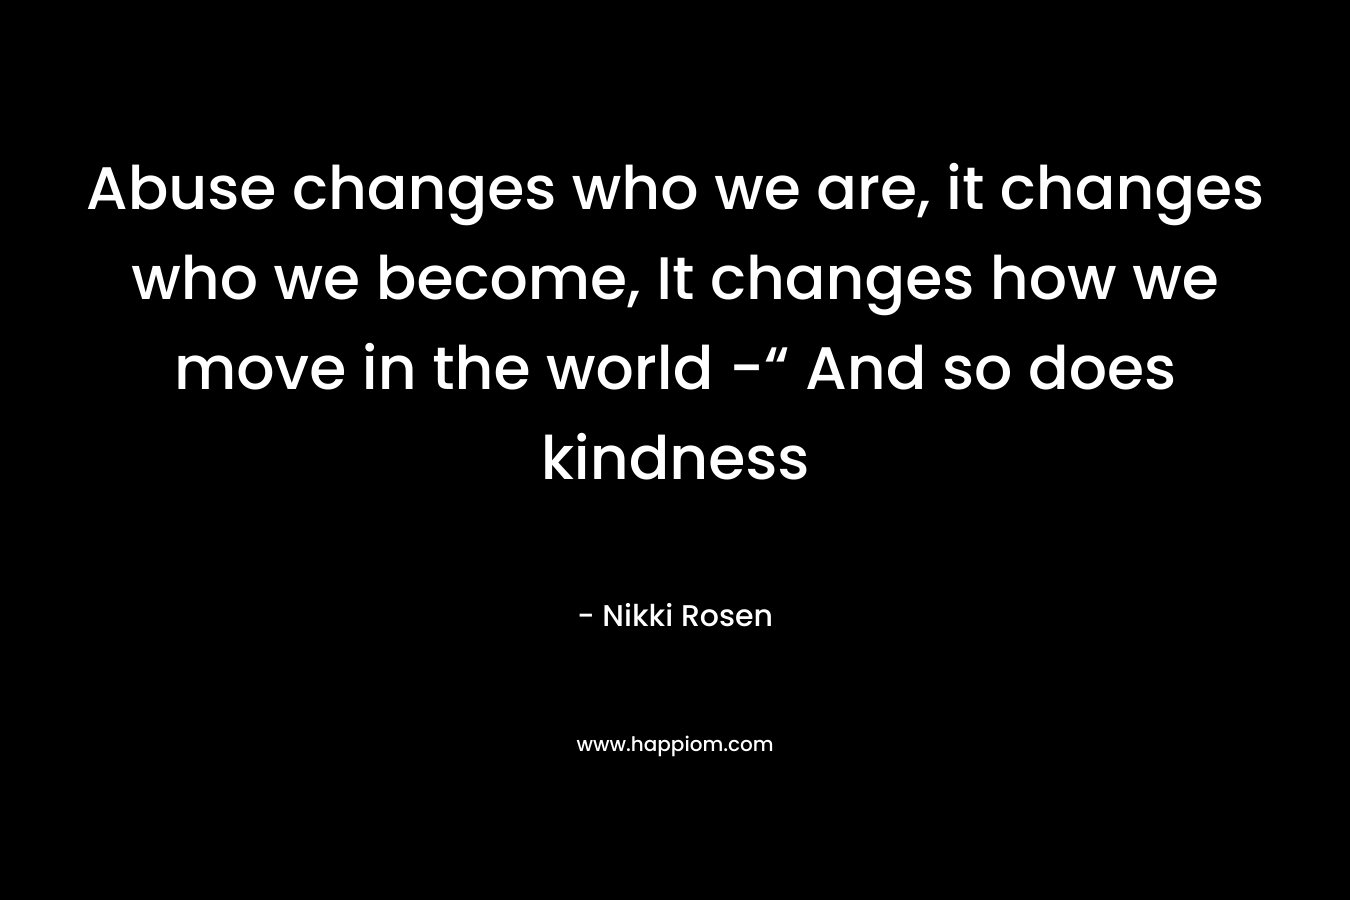 Abuse changes who we are, it changes who we become, It changes how we move in the world -“ And so does kindness